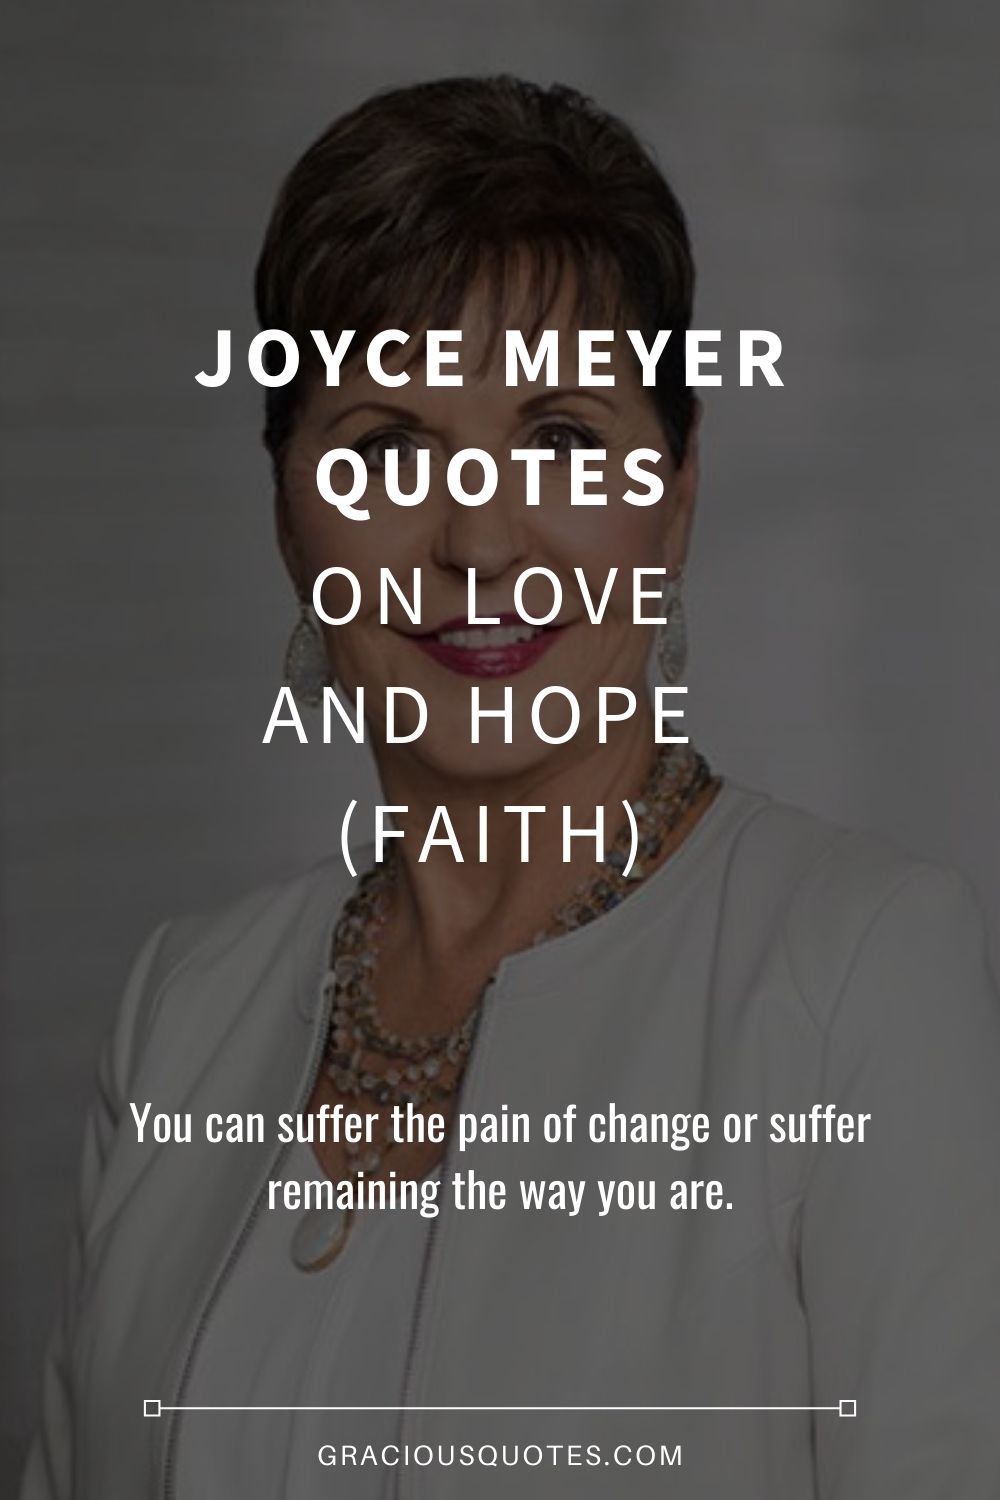 Joyce Meyer Quotes on Love and Hope (FAITH) - Gracious Quotes